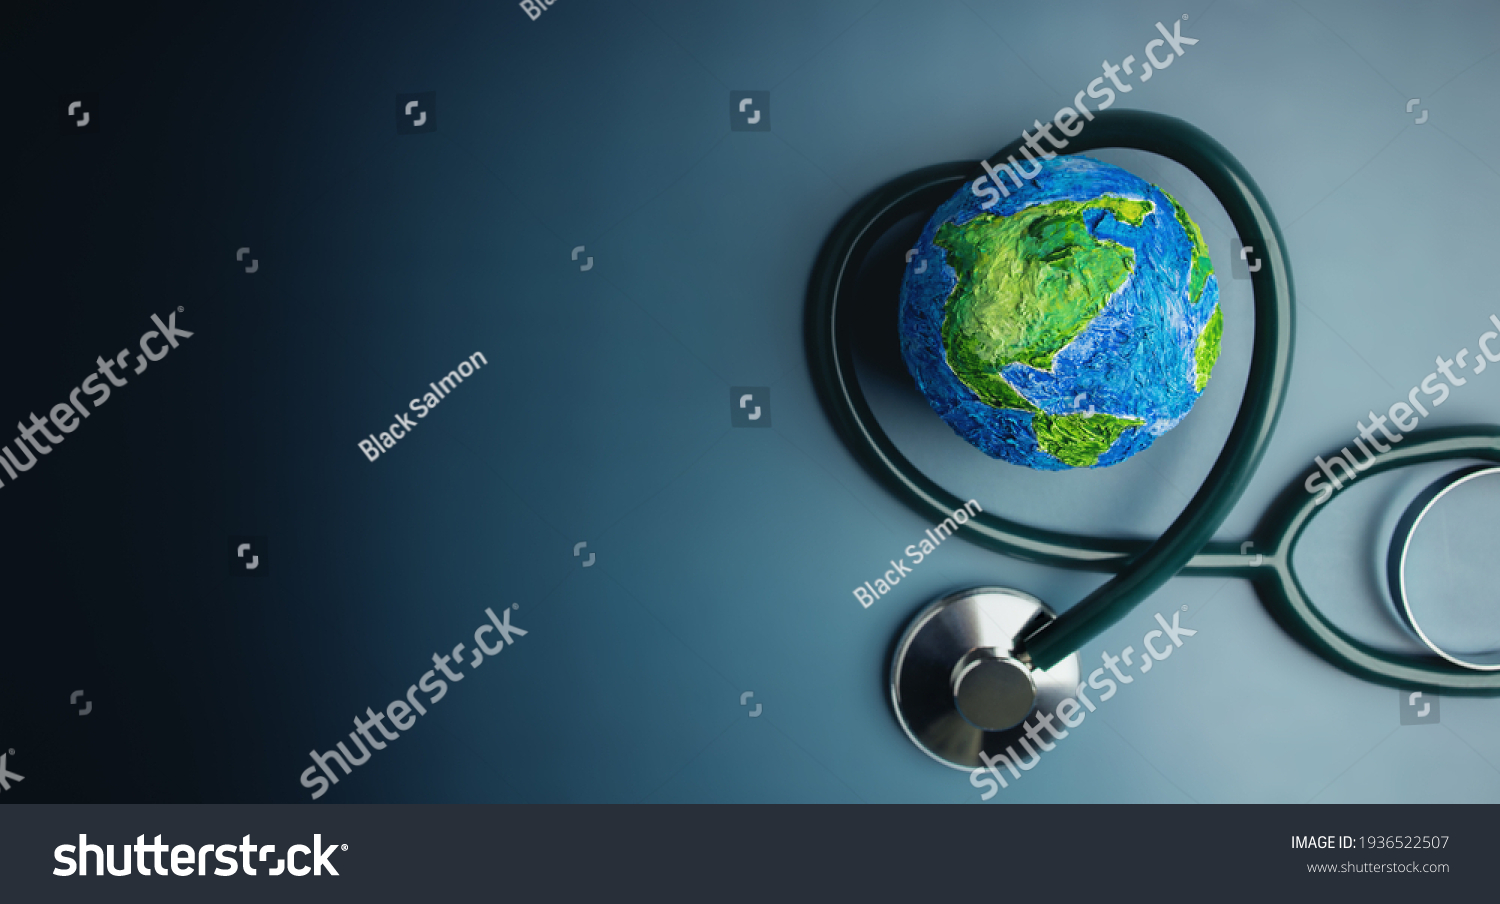 World Health Day. Global Health Awareness Concept. Handmade Globe inside Stethoscope as Heart Shape. Green Environment to Love and Care #1936522507